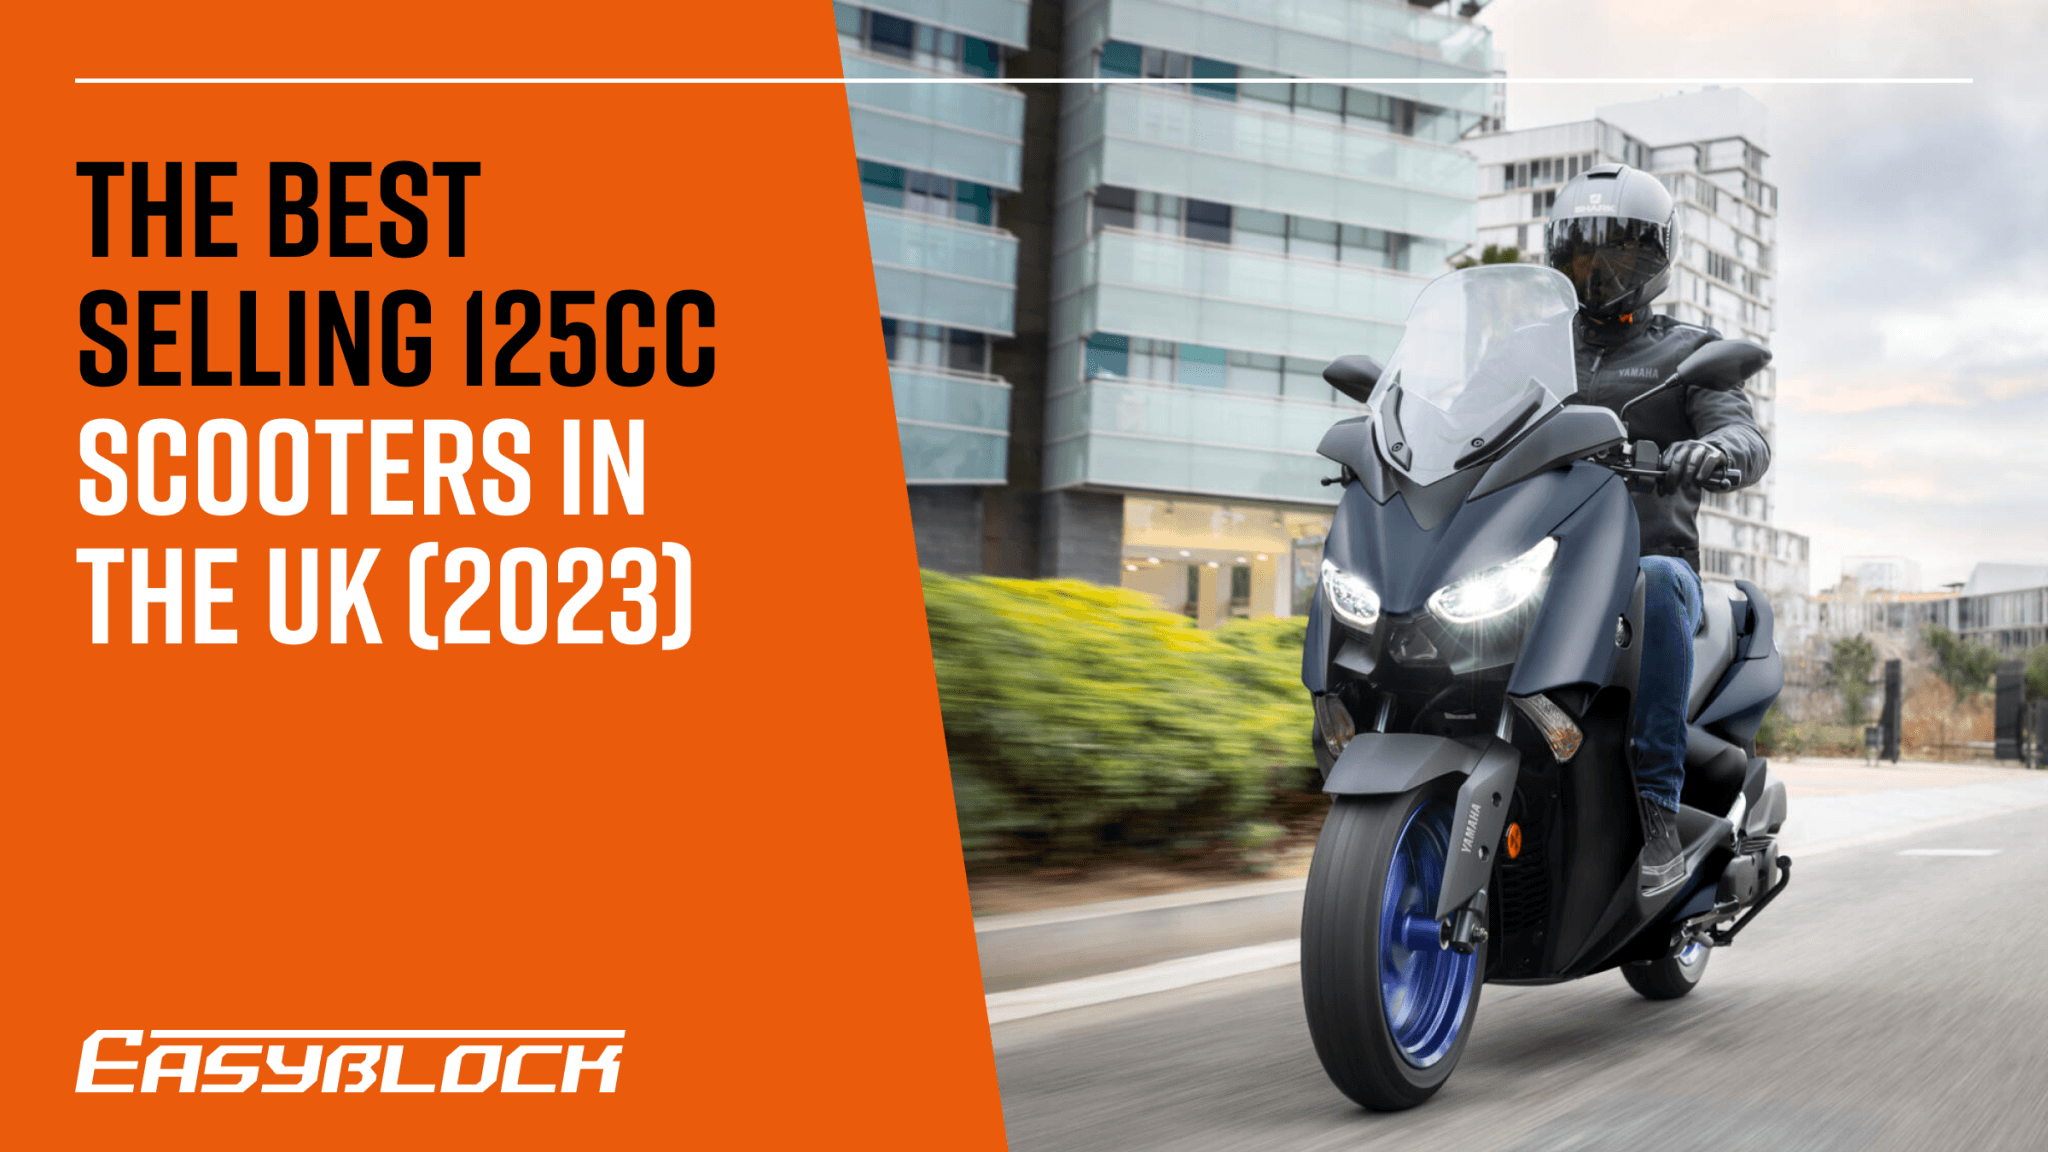 Top 10 Best 125cc Scooters (2023)